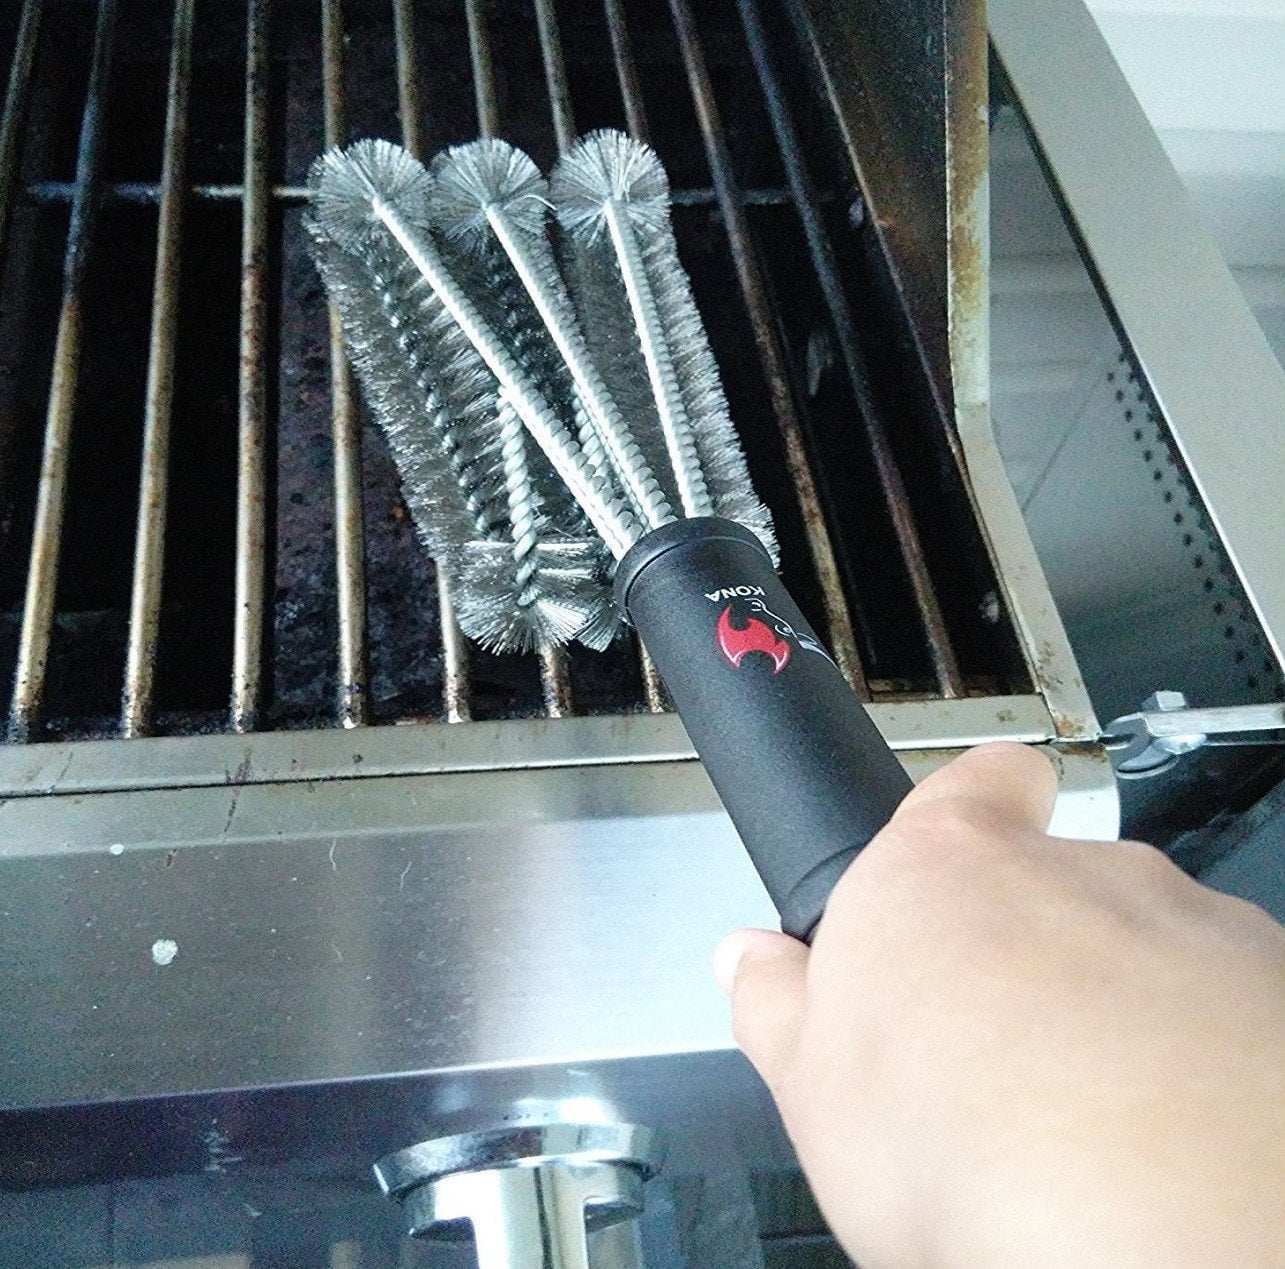 360 Clean Grill Brush, Superior BBQ Cleaning